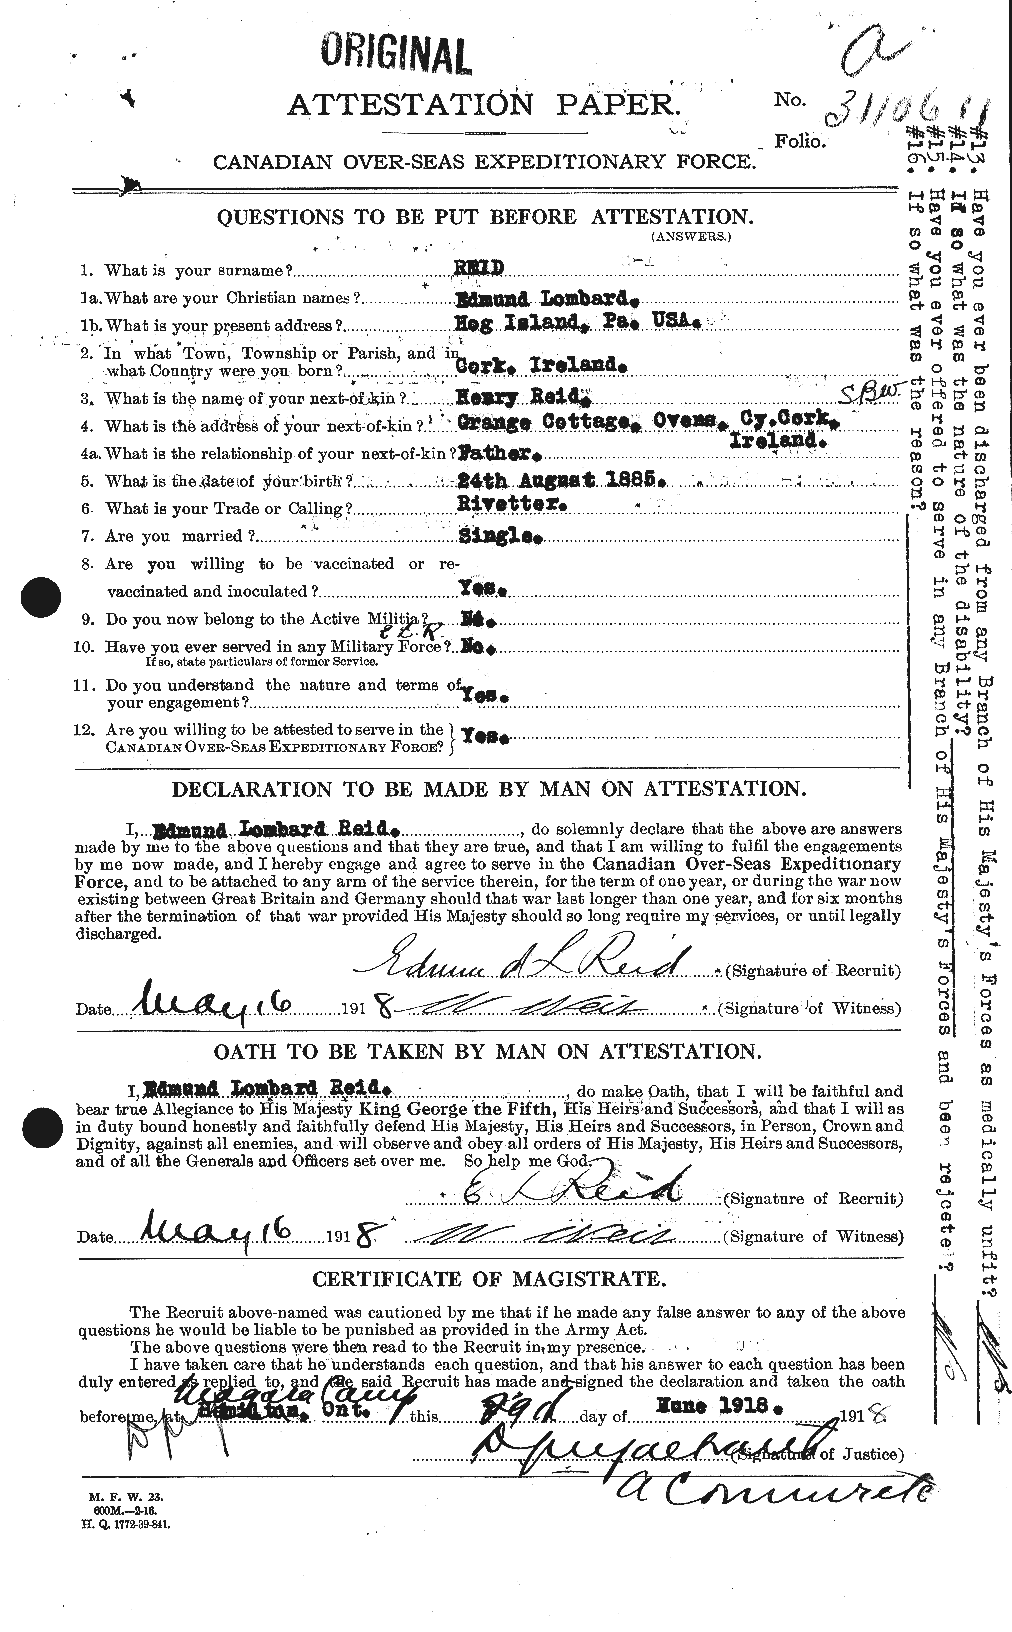 Personnel Records of the First World War - CEF 597980a